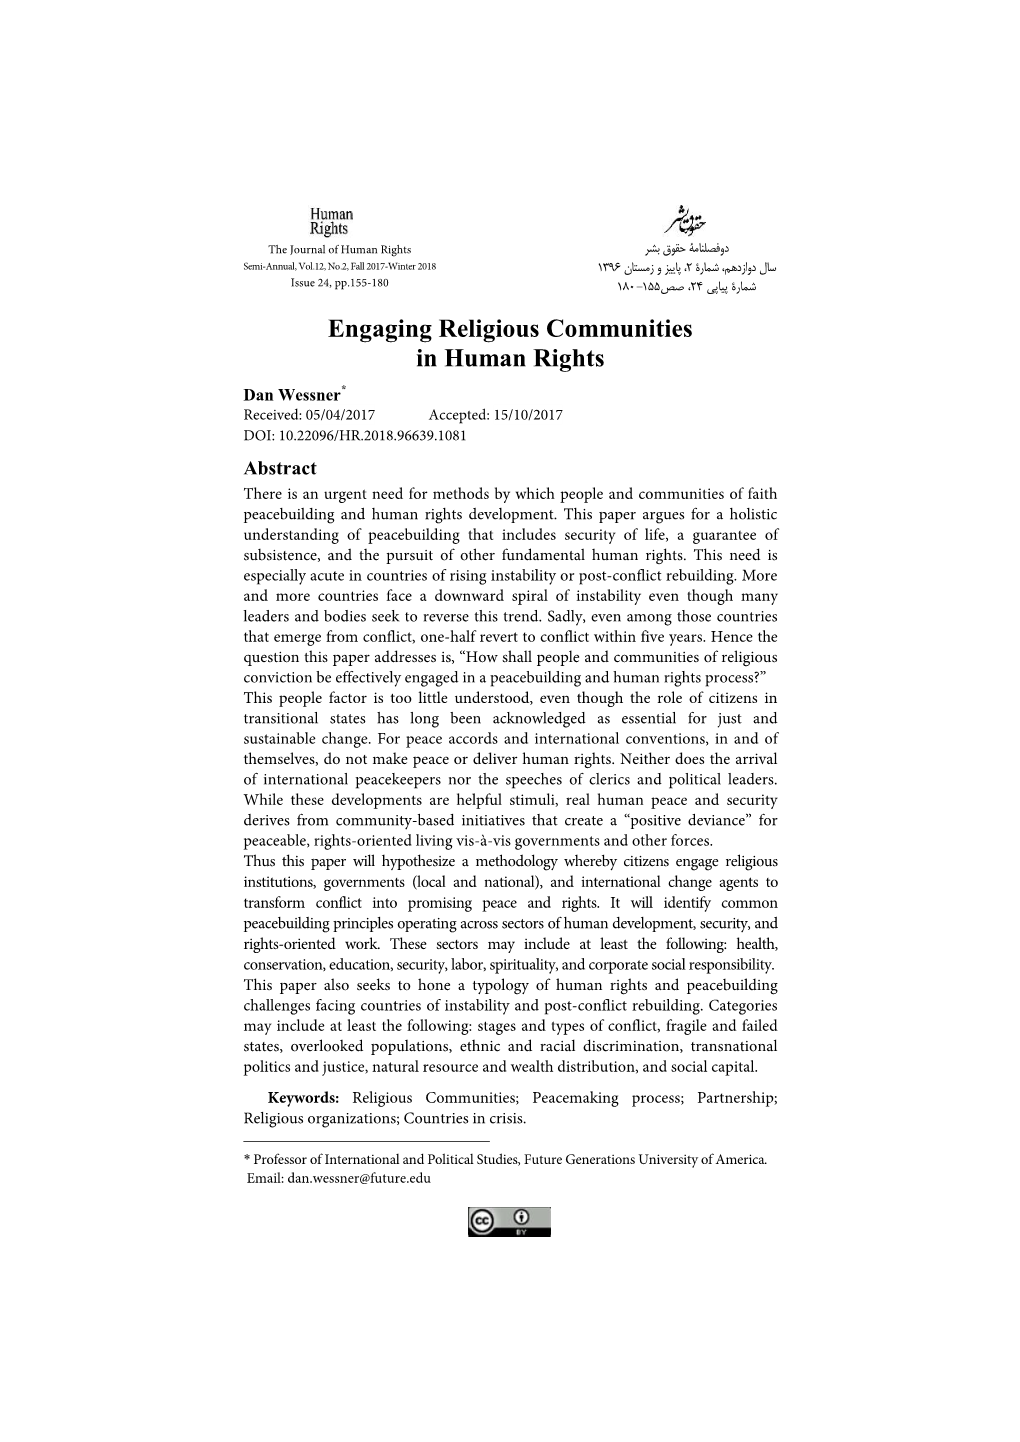 Engaging Religious Communities in Human Rights